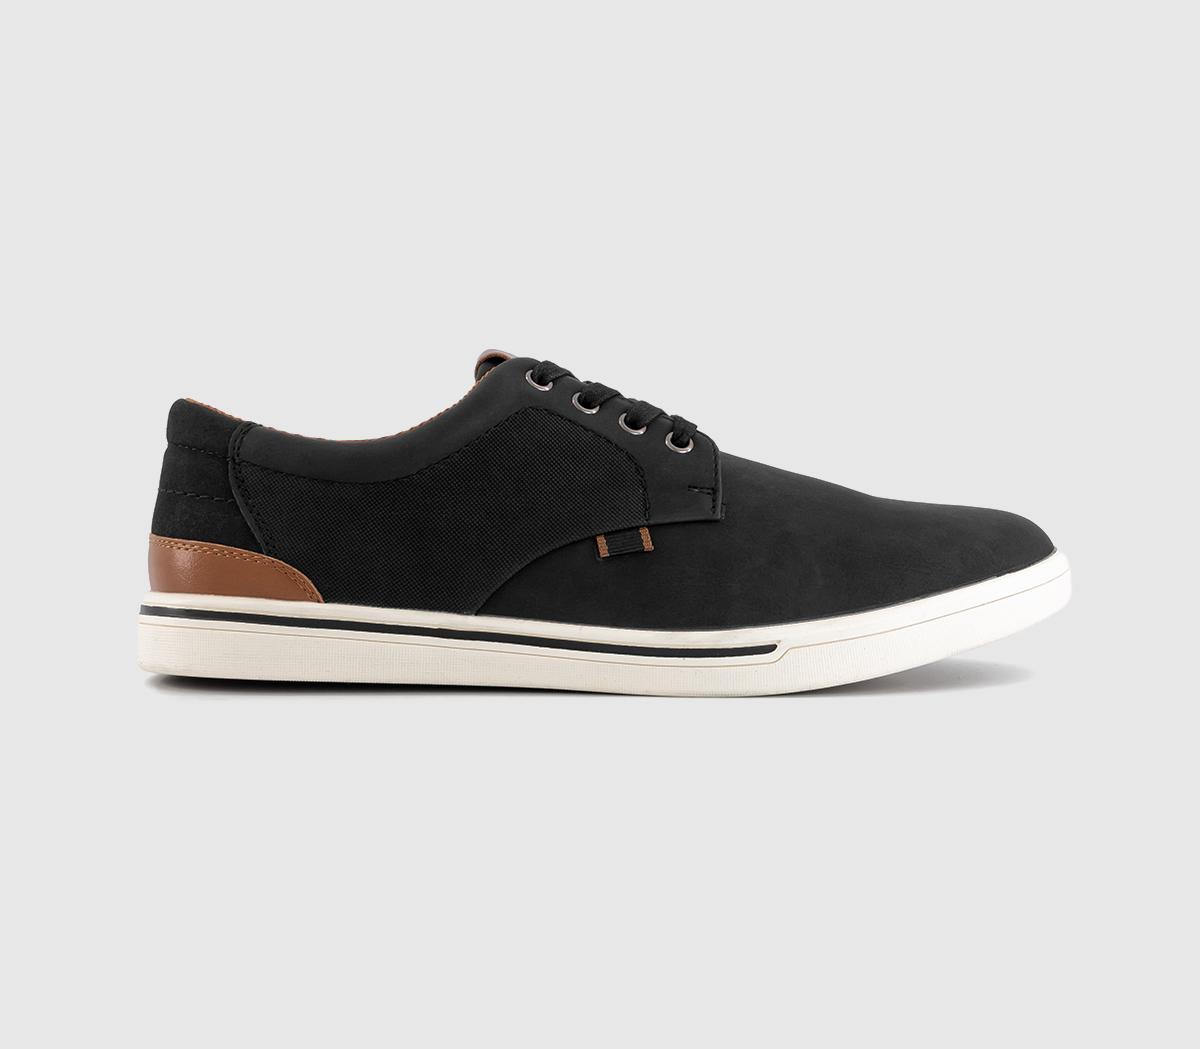 OFFICECasey Perforated Lace Up ShoesBlack